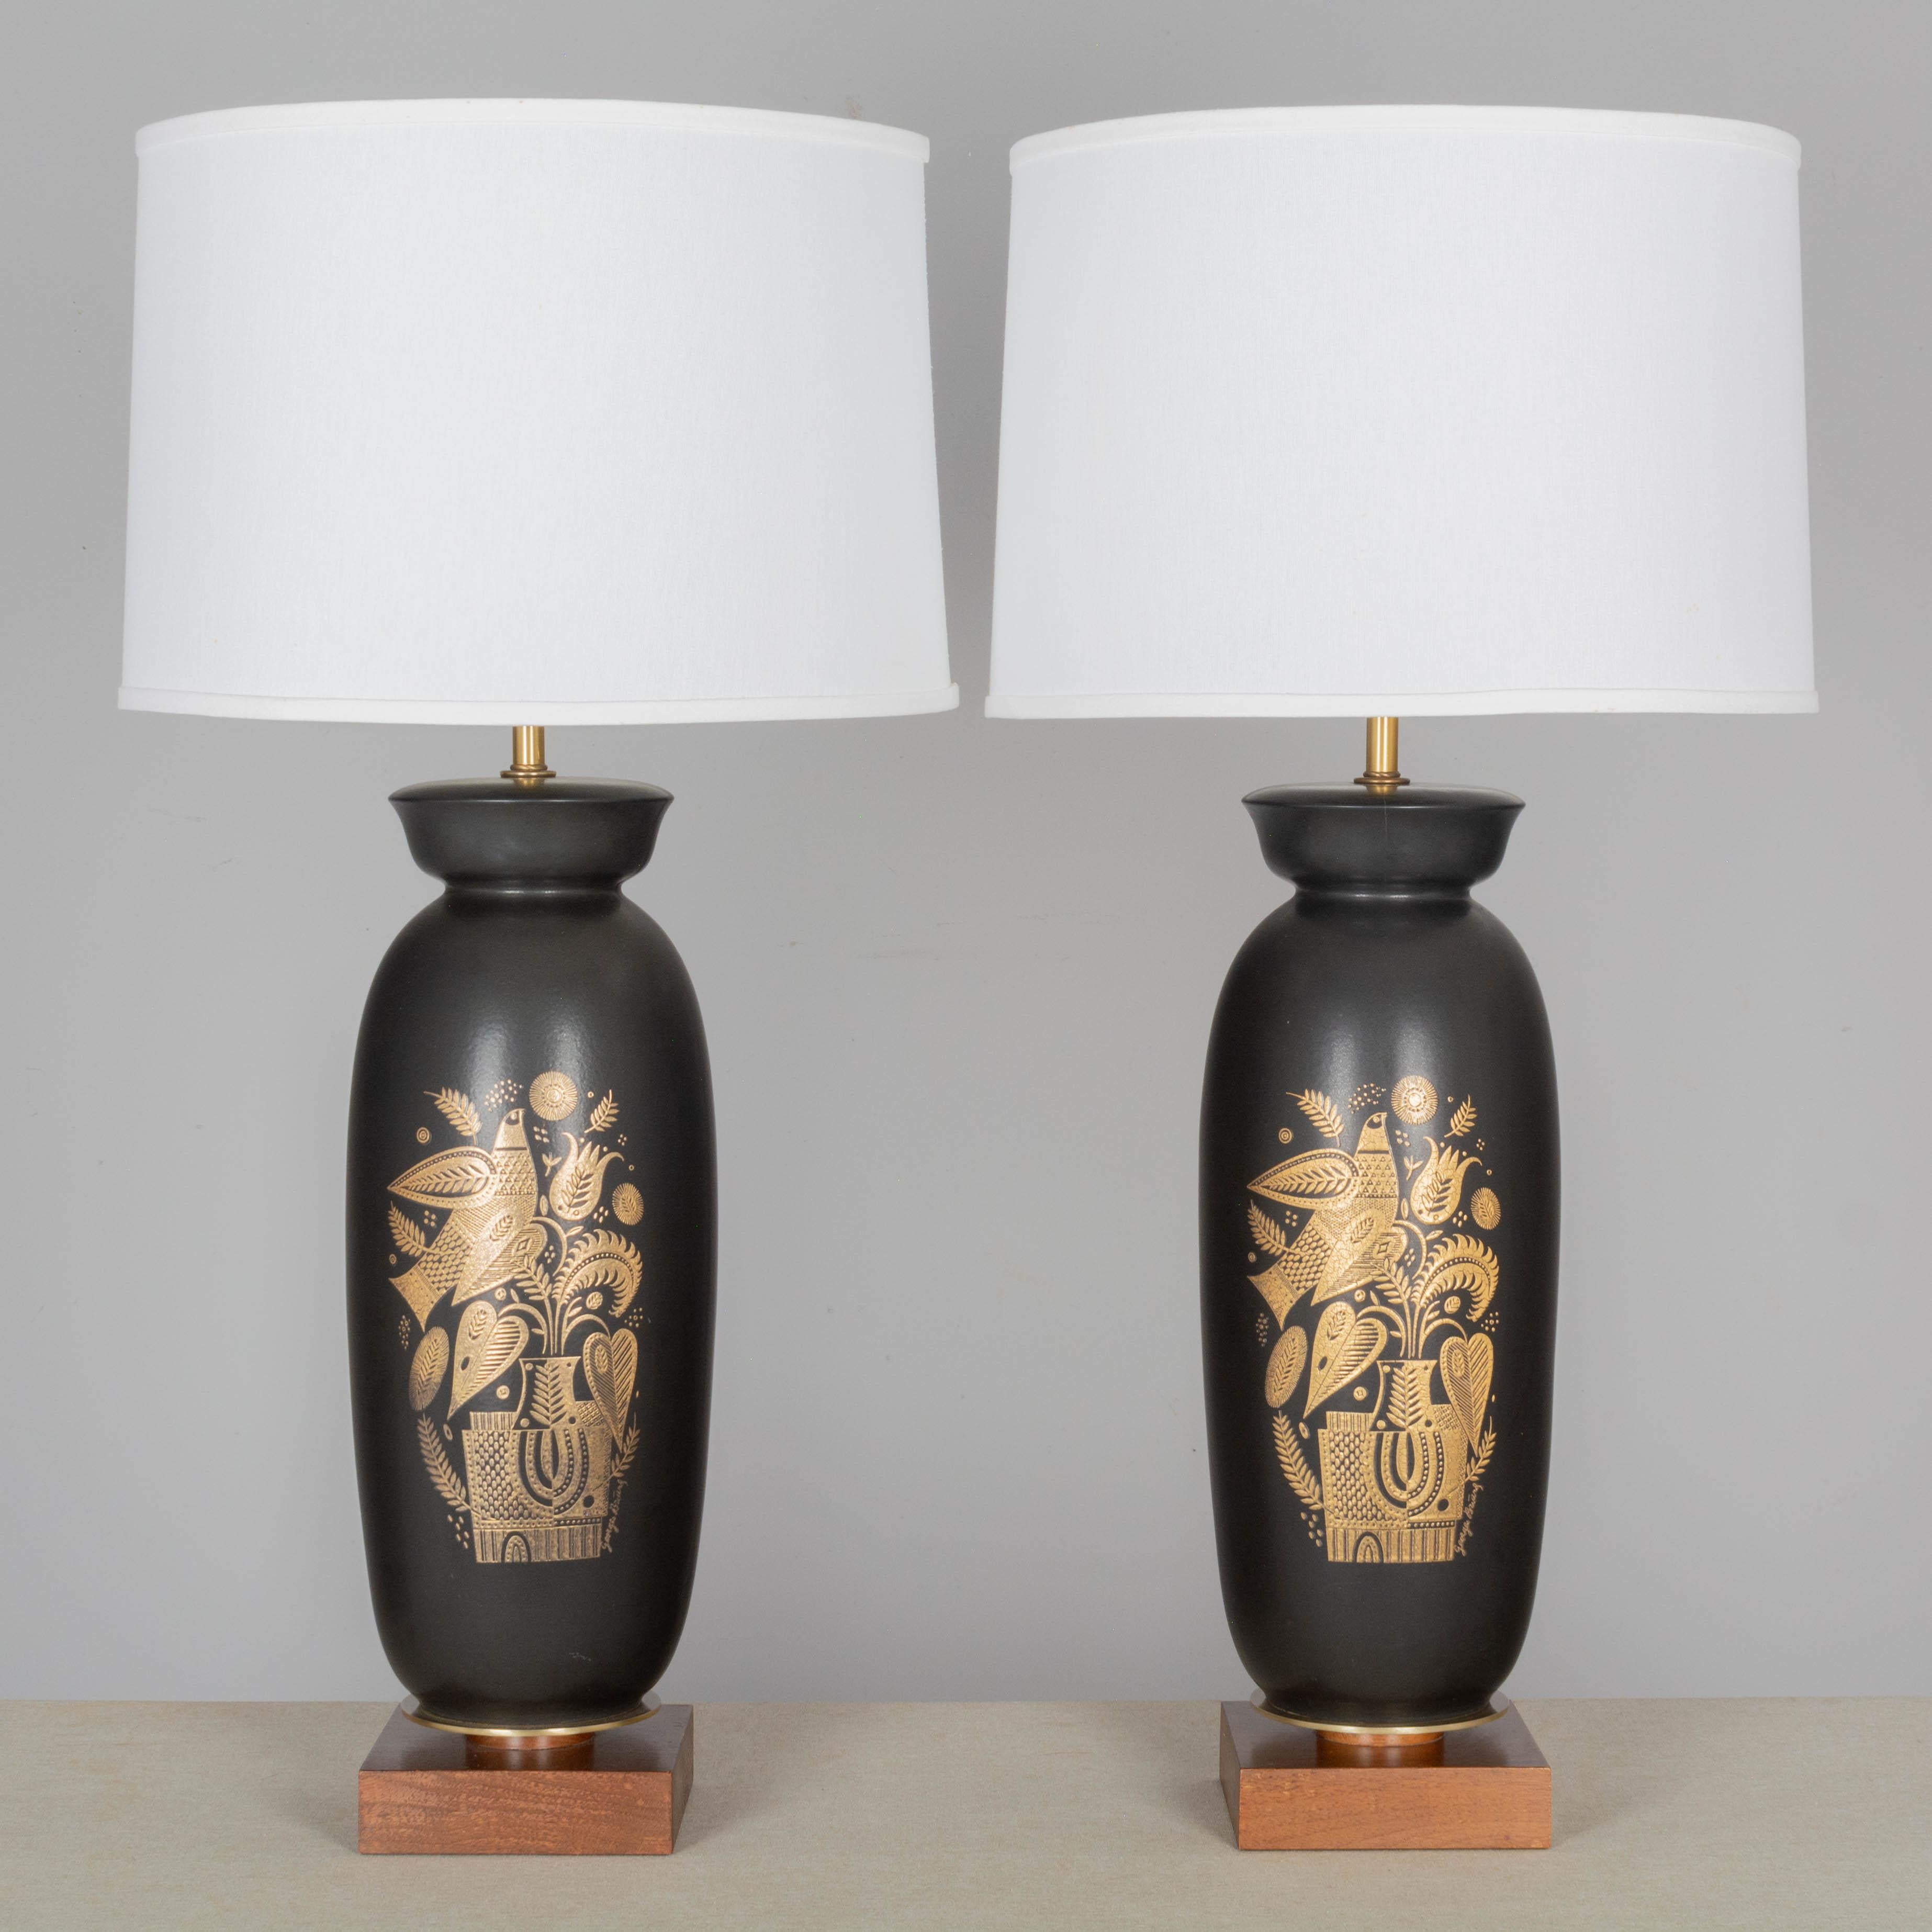 A pair of iconic Midcentury Modern ceramic lamps by Georges Briard. Tall matte black ceramic body with gold decoration of a stylized bird and potted plant. Square wood base with brass disc. New socket, cord and brass finials. Please see photos for